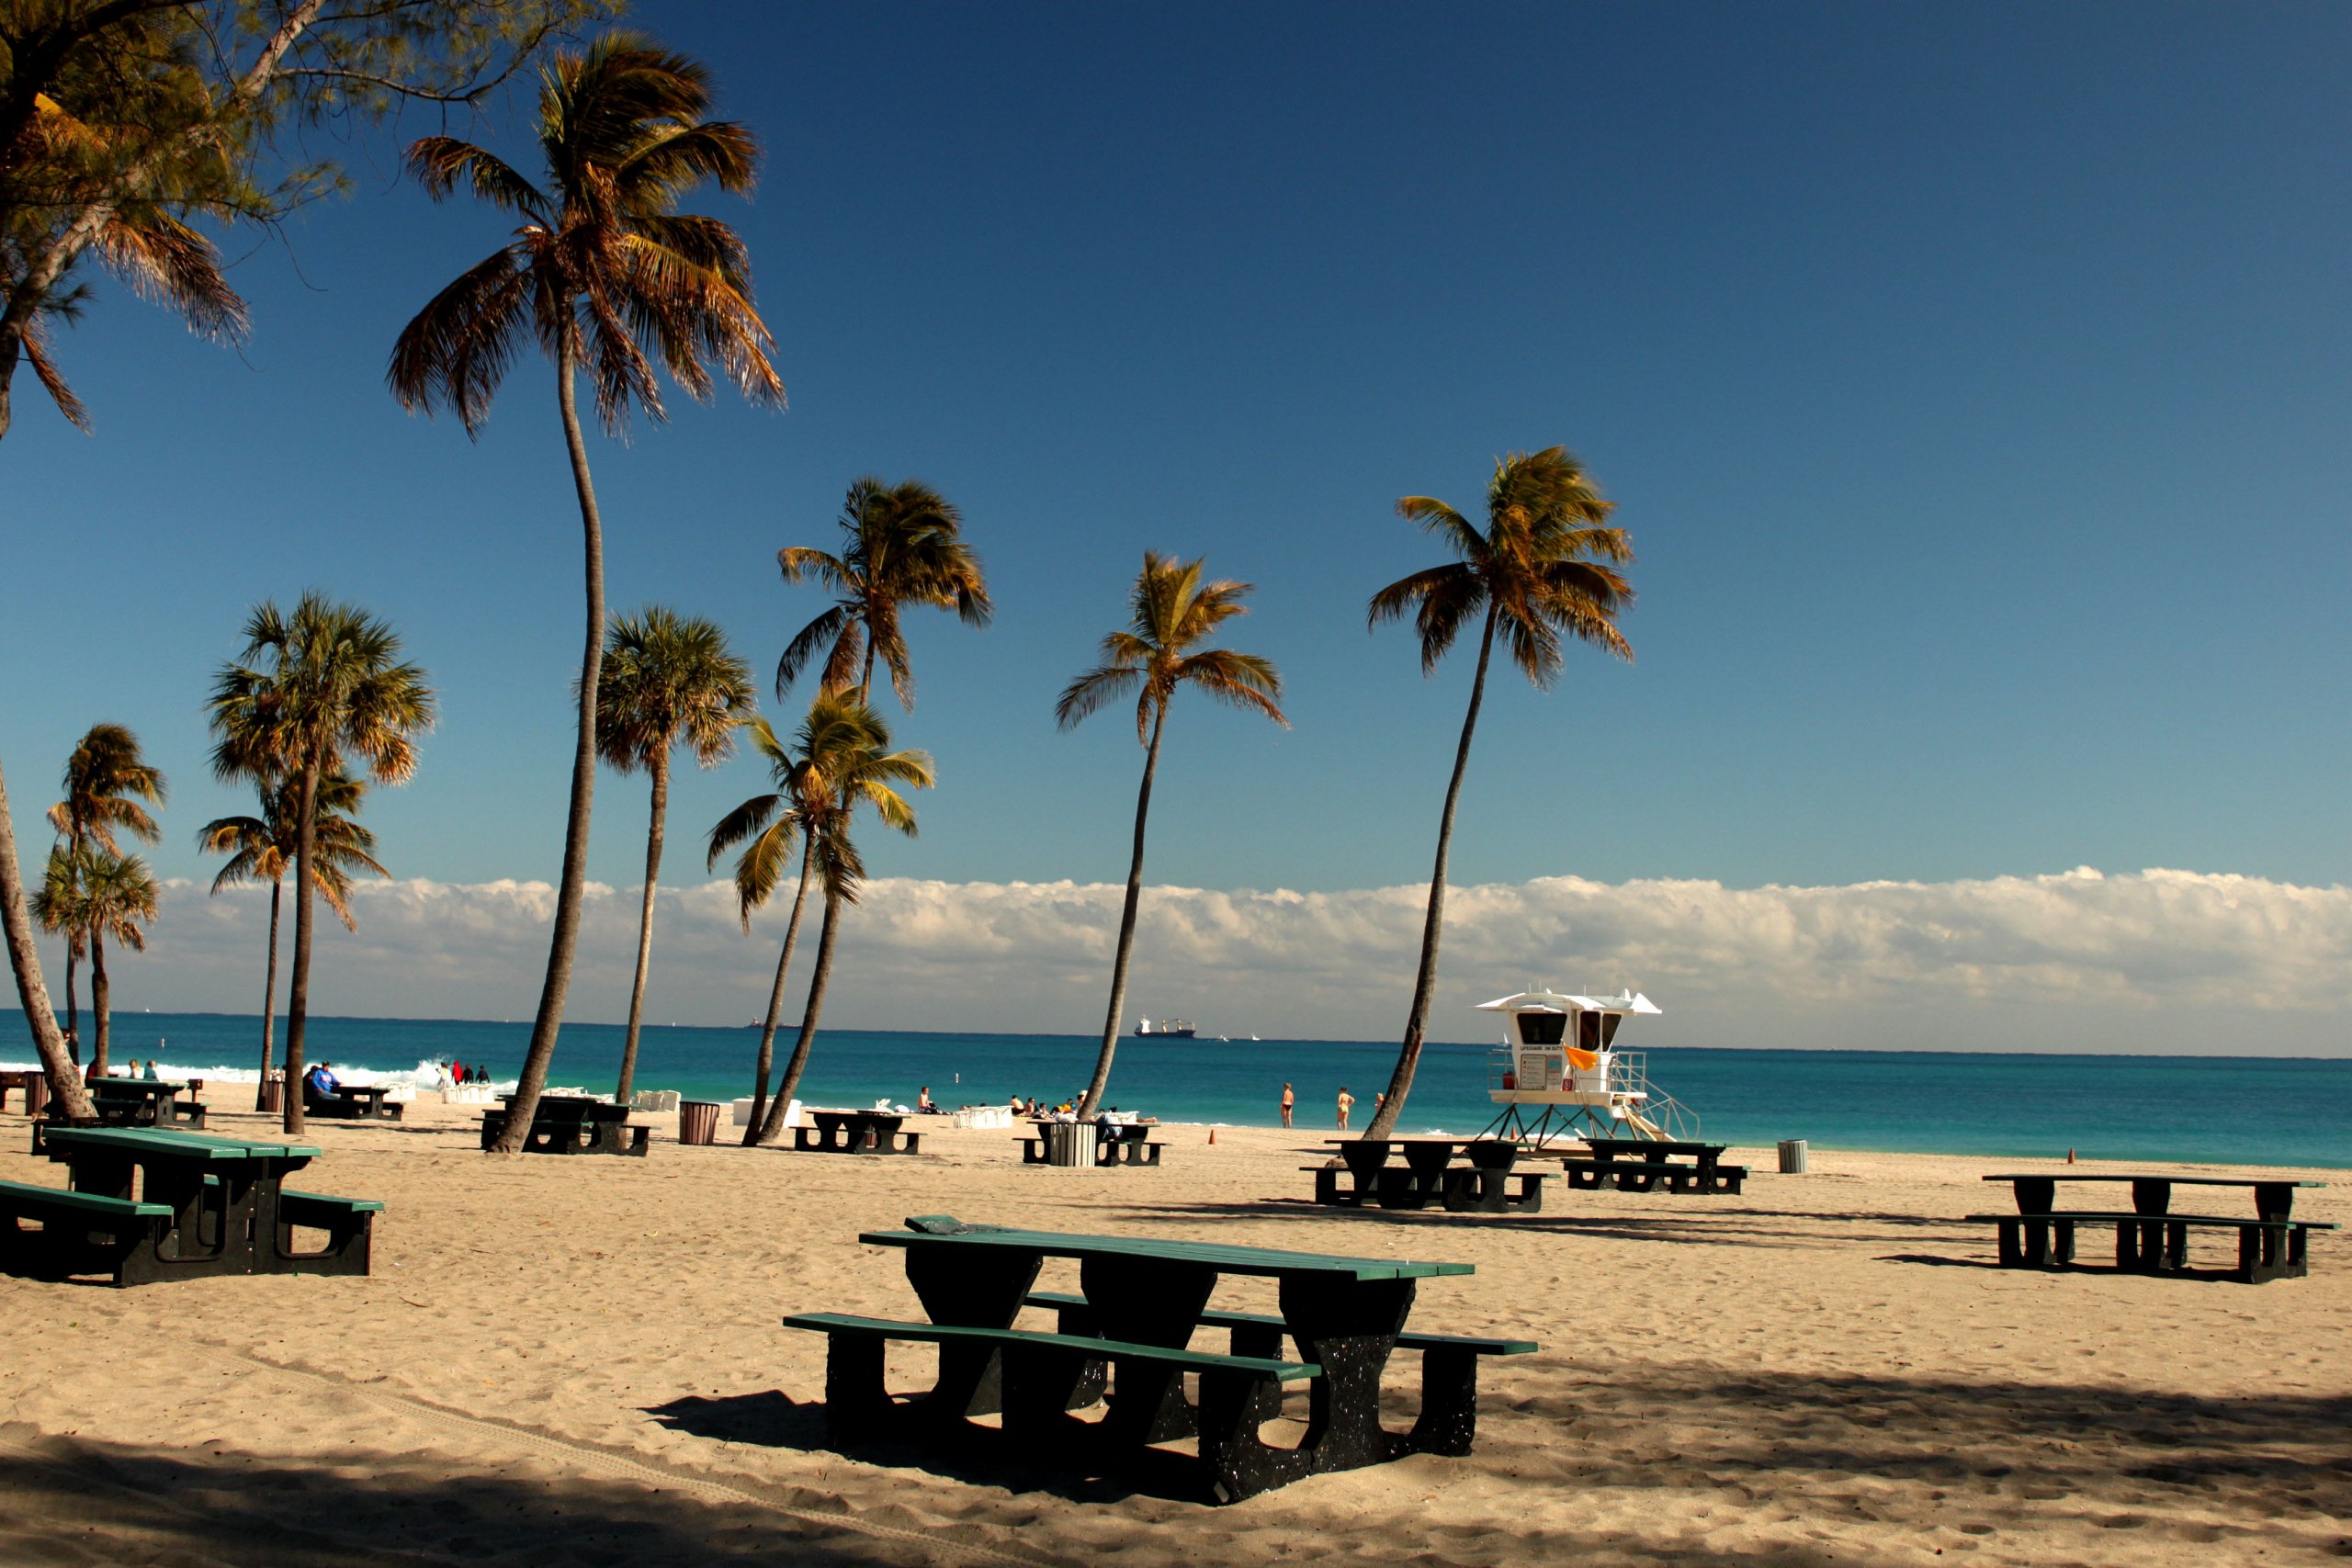 Things to do in Fort Lauderdale, Florida.